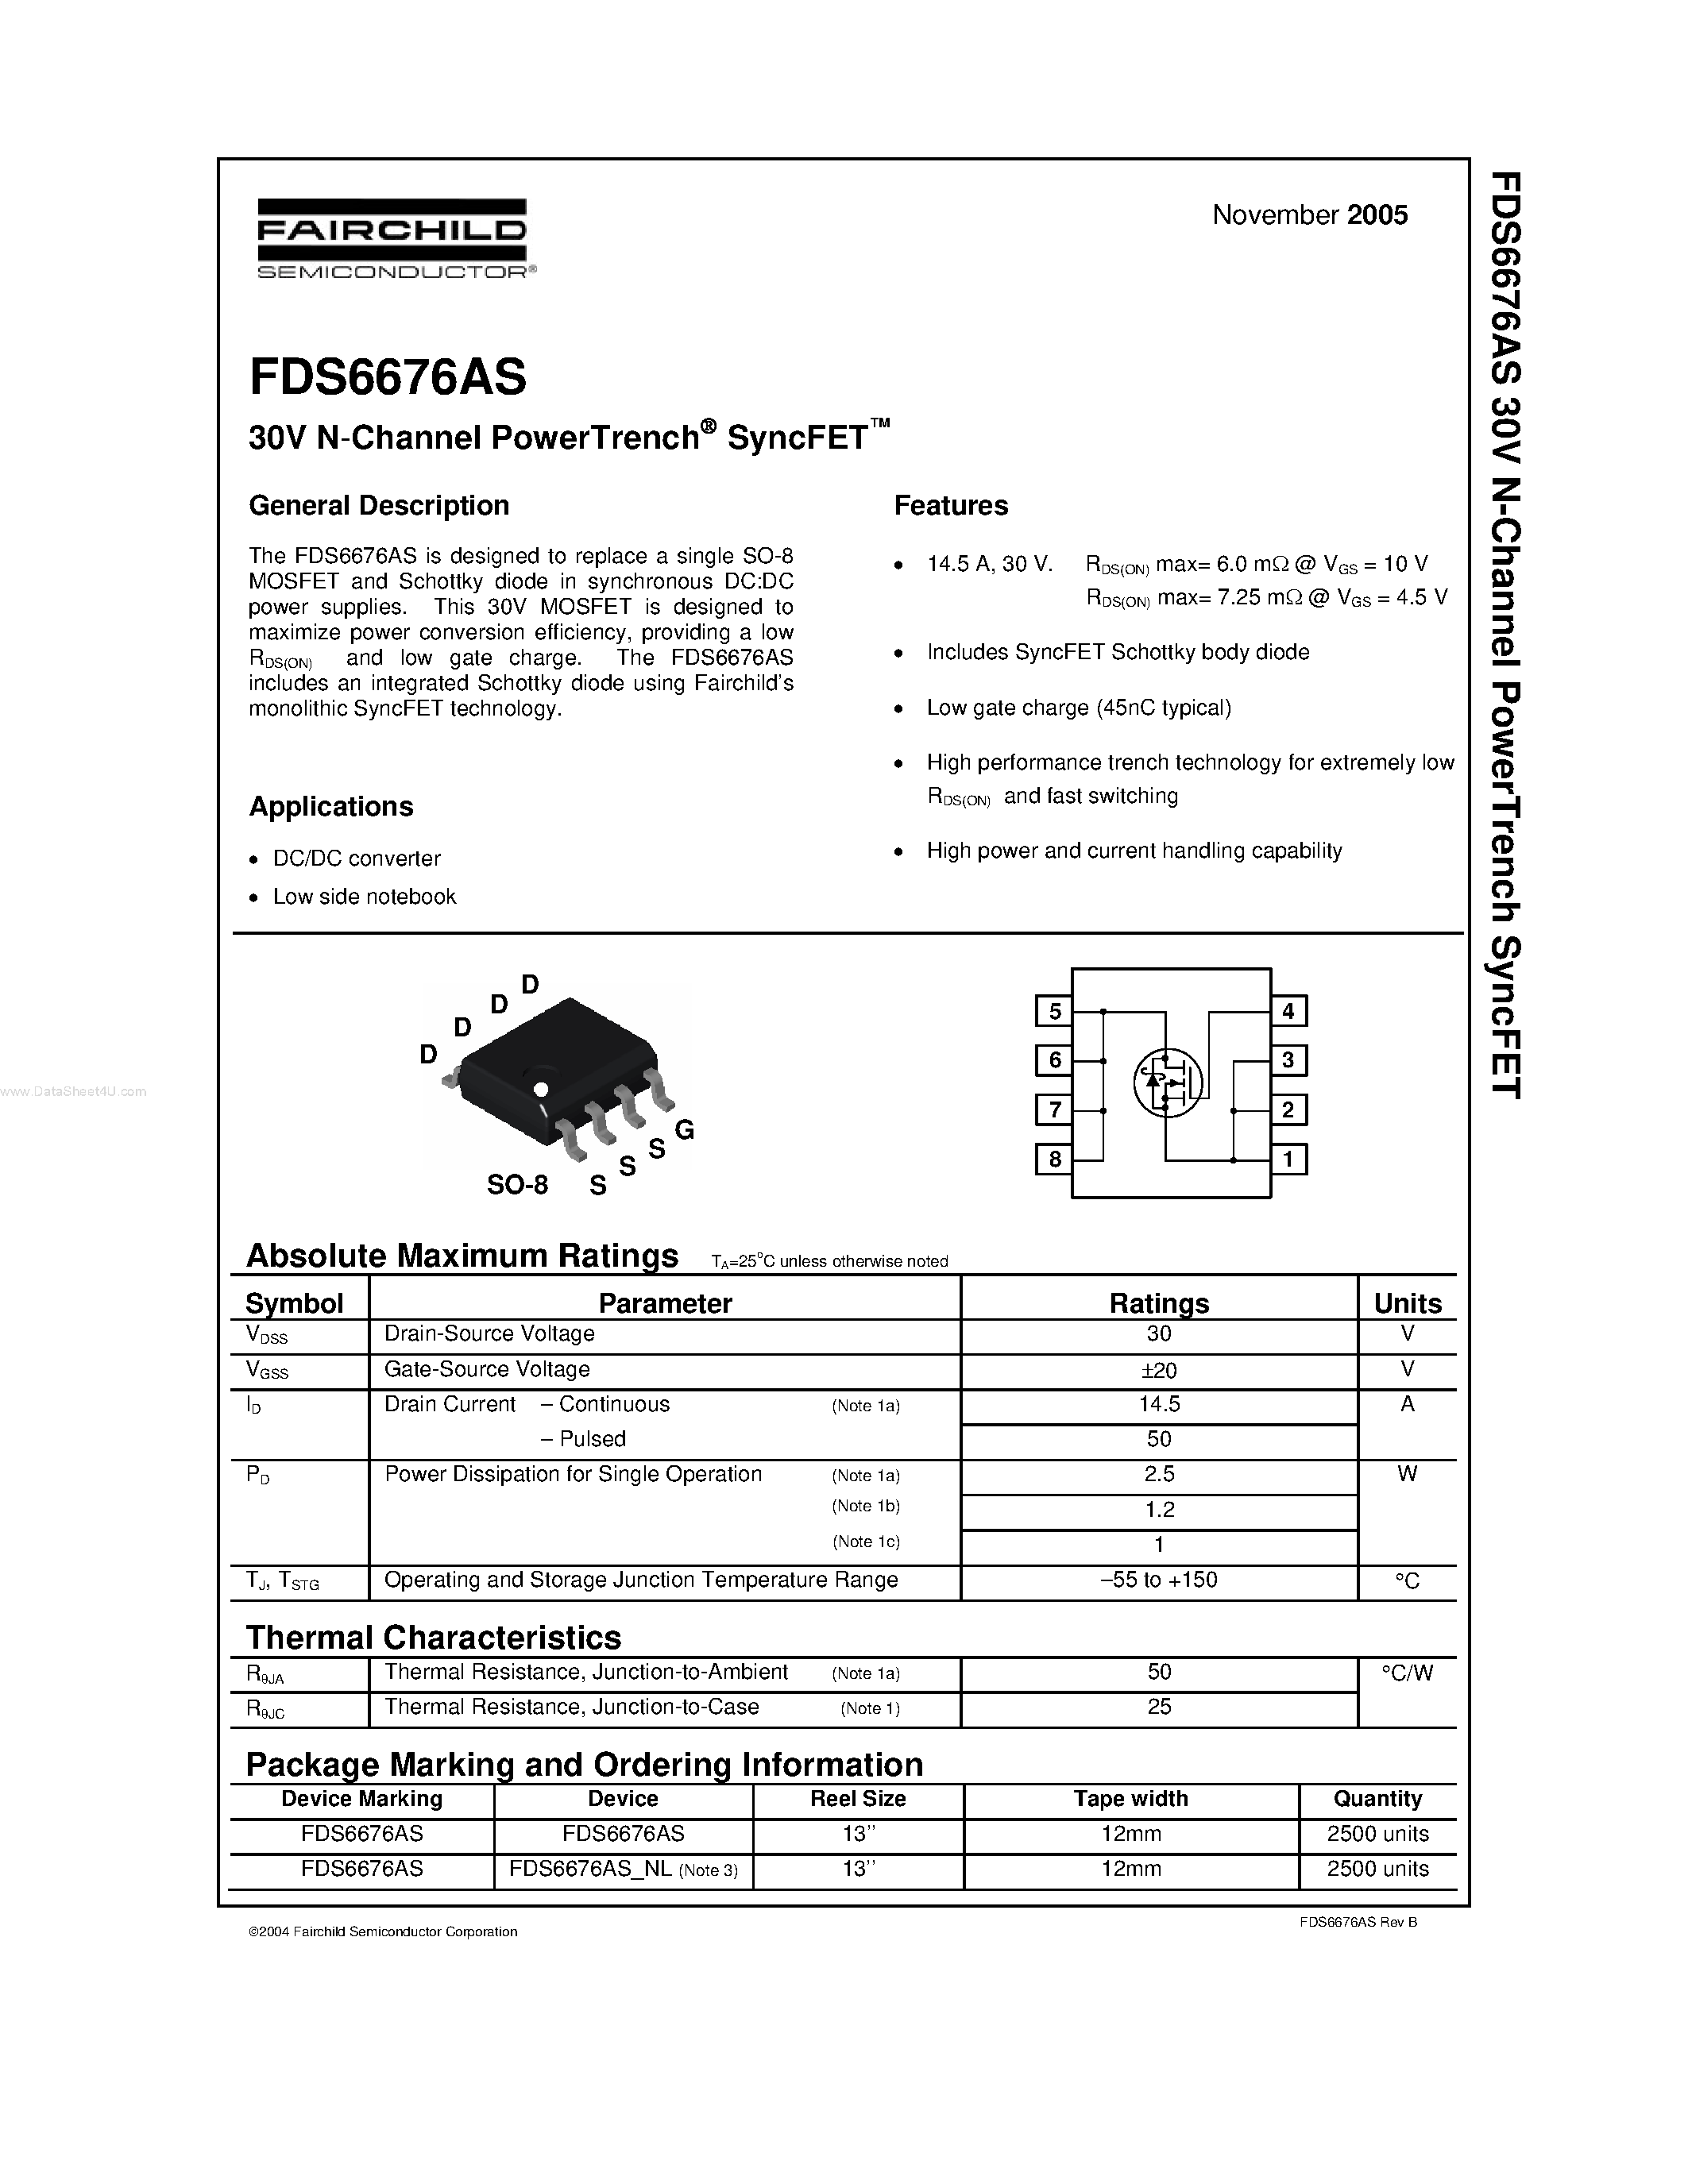 Даташит FDS6676AS - 30V N-Channel PowerTrench SyncFET страница 1